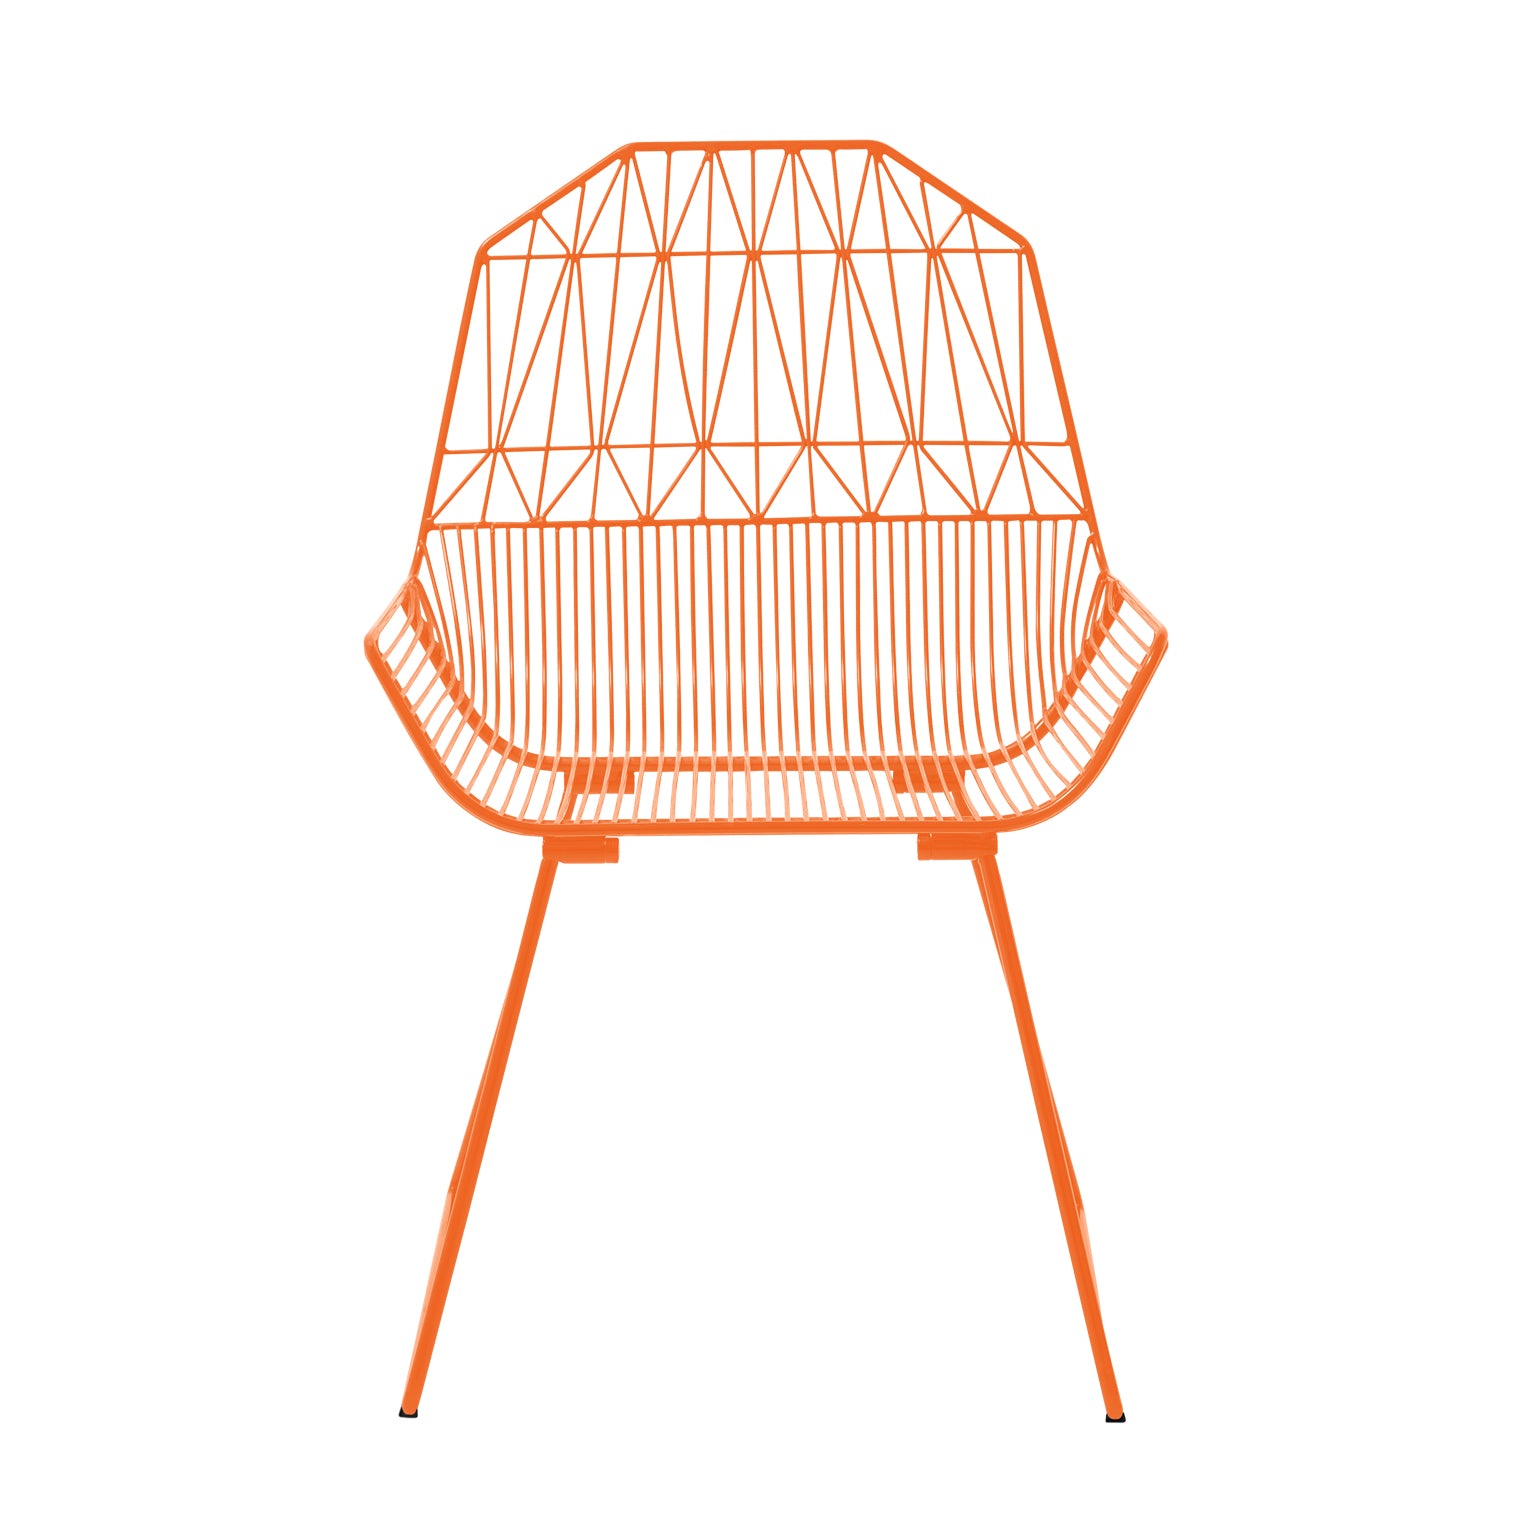 Farmhouse Lounge Chair: Orange + Without Seat Pad